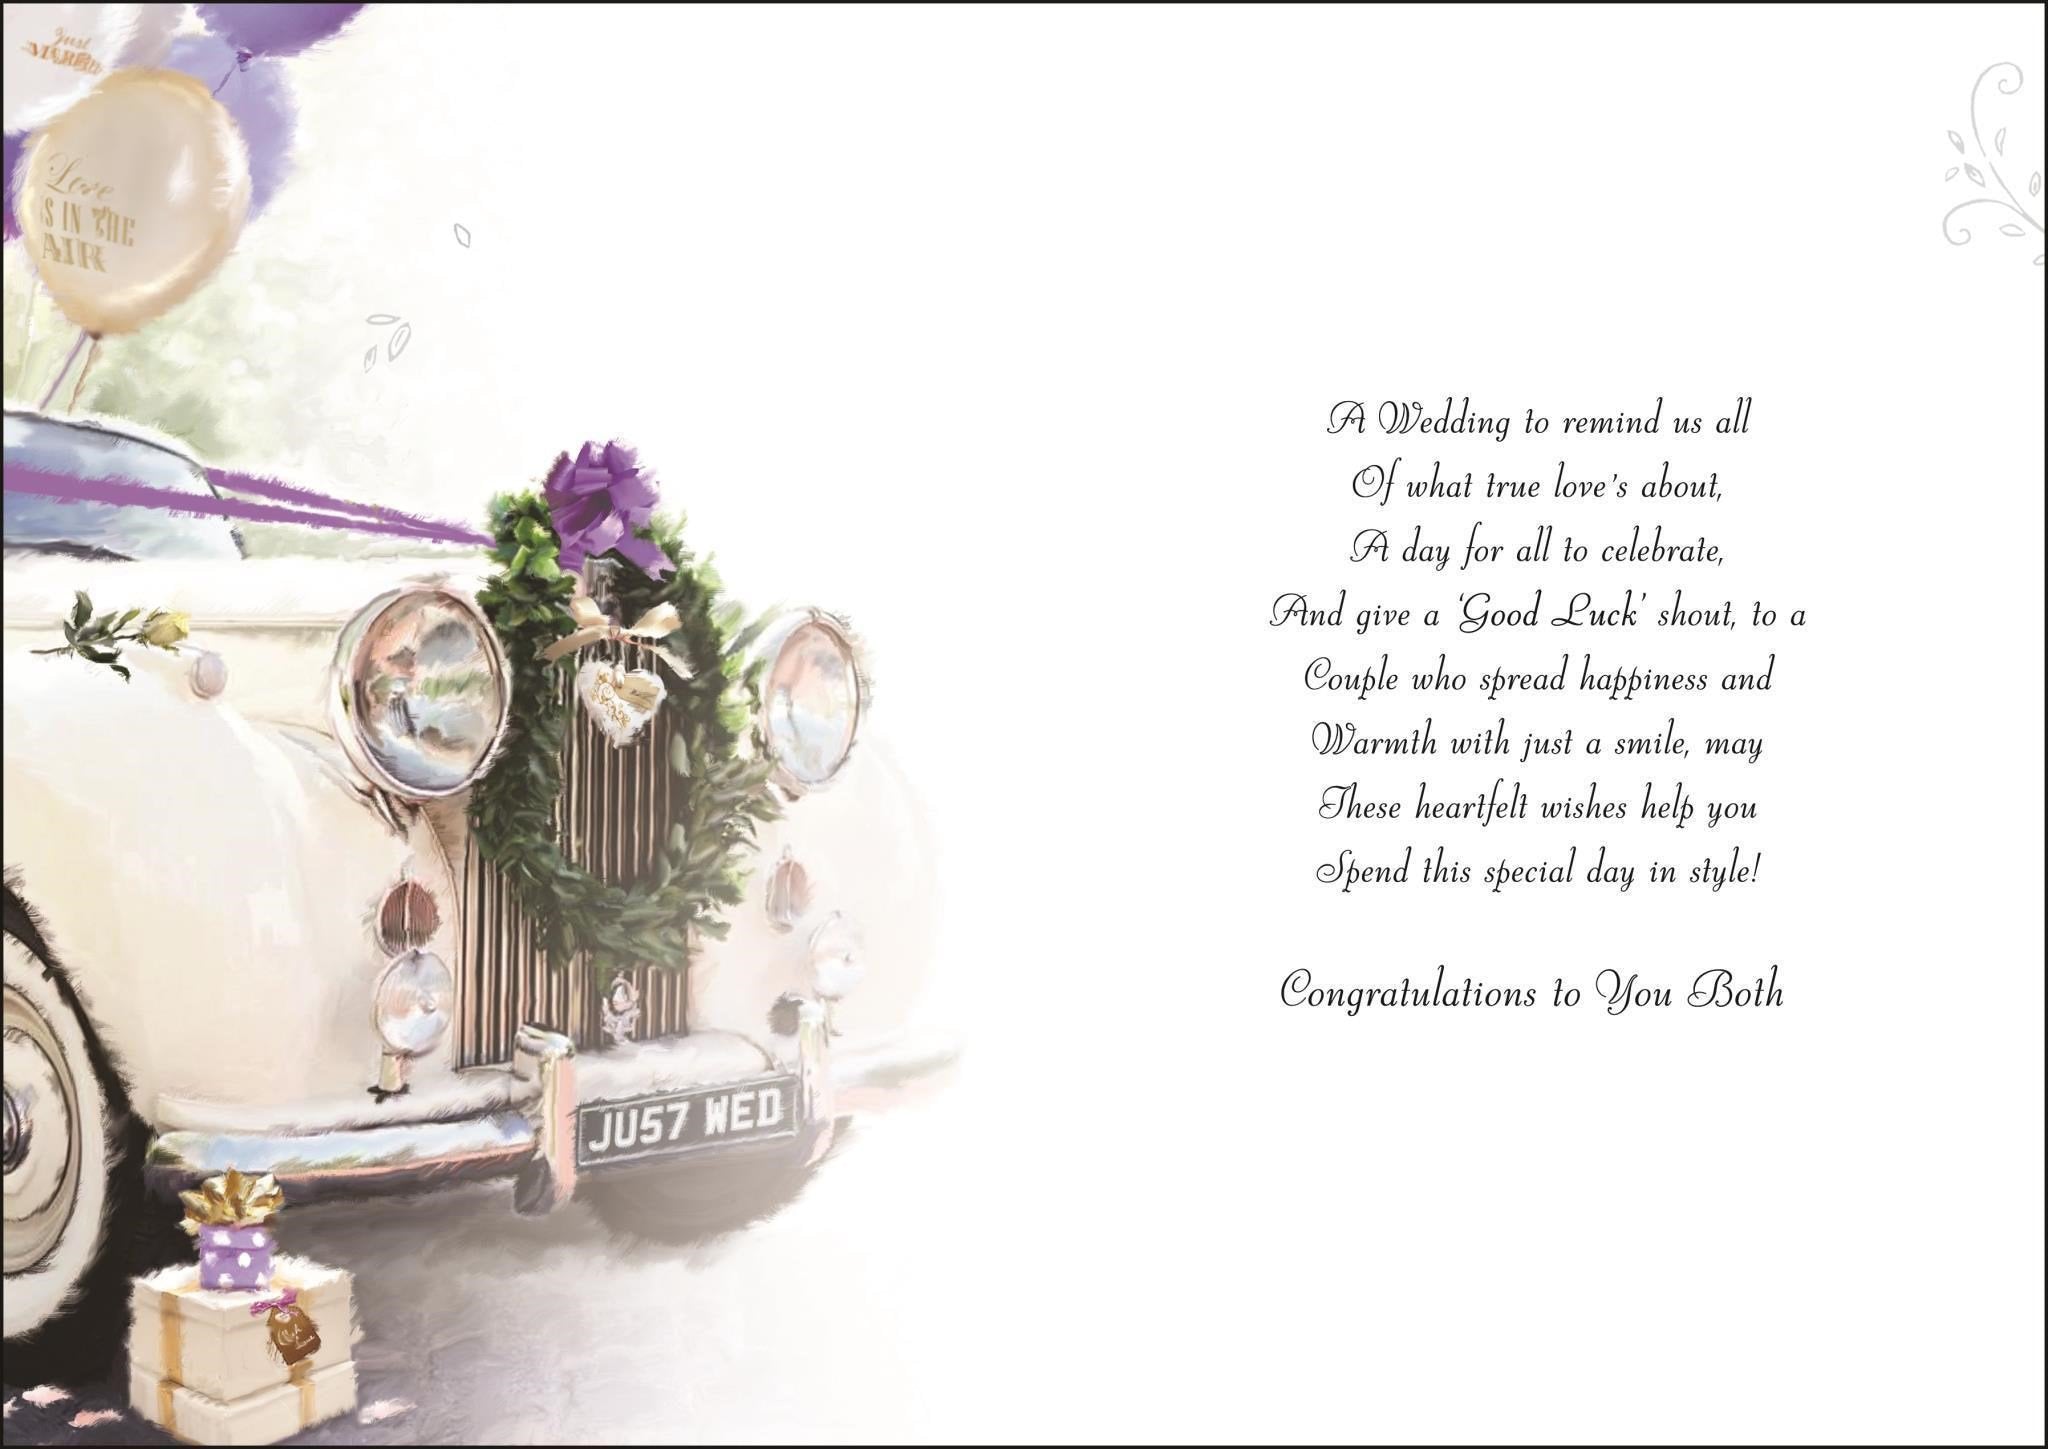 Inside of Special Couple White Car Greetings Card